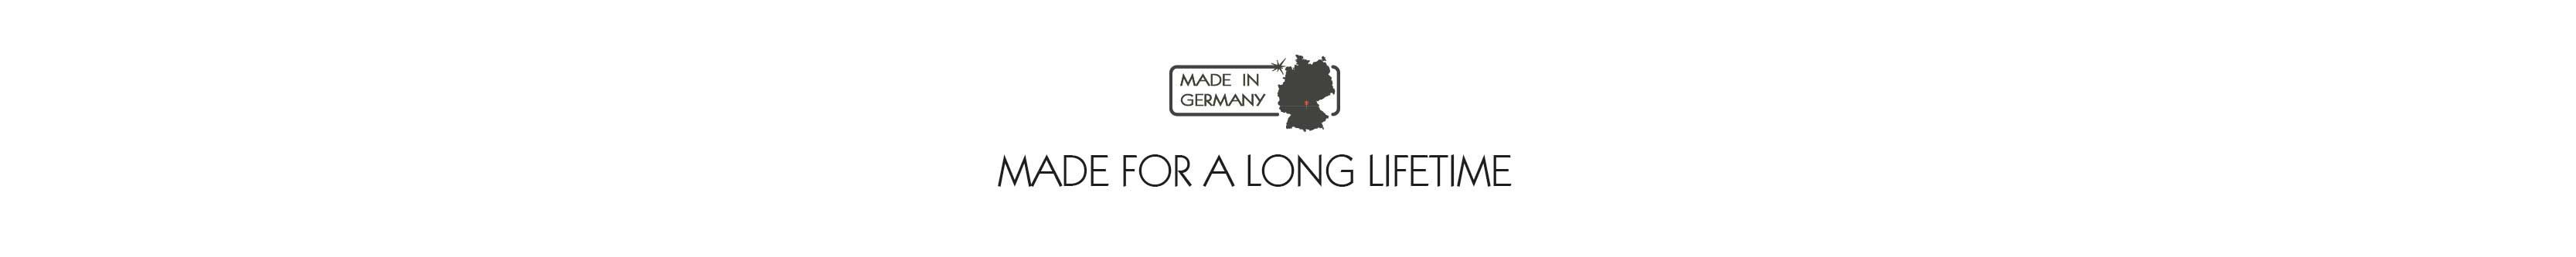 Made in Germany-made for a long lifetime